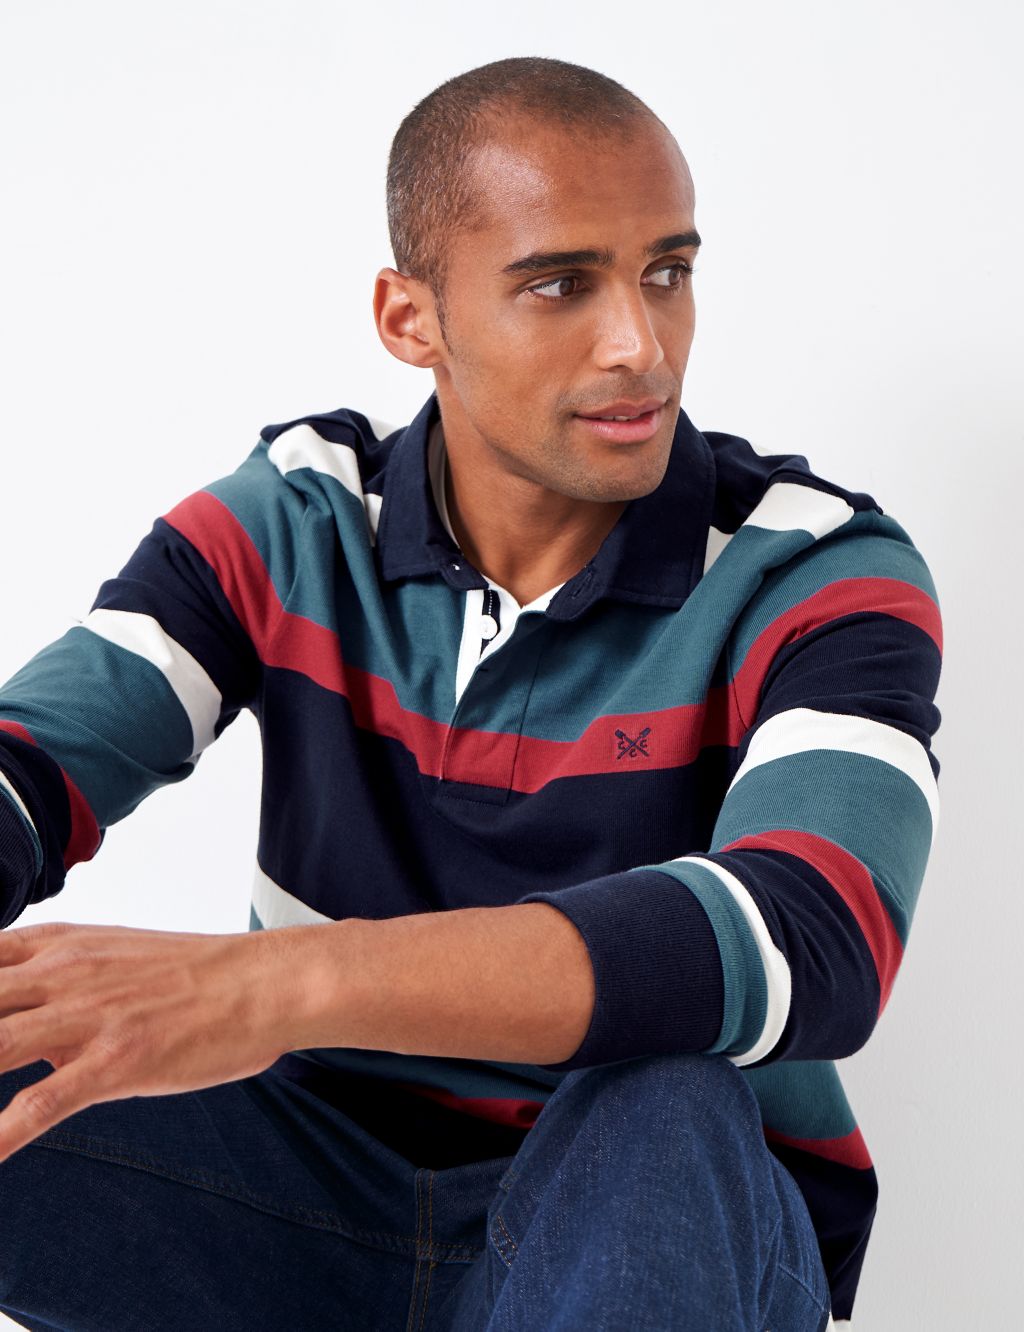 Pure Cotton Striped Long Sleeve Rugby Shirt image 5